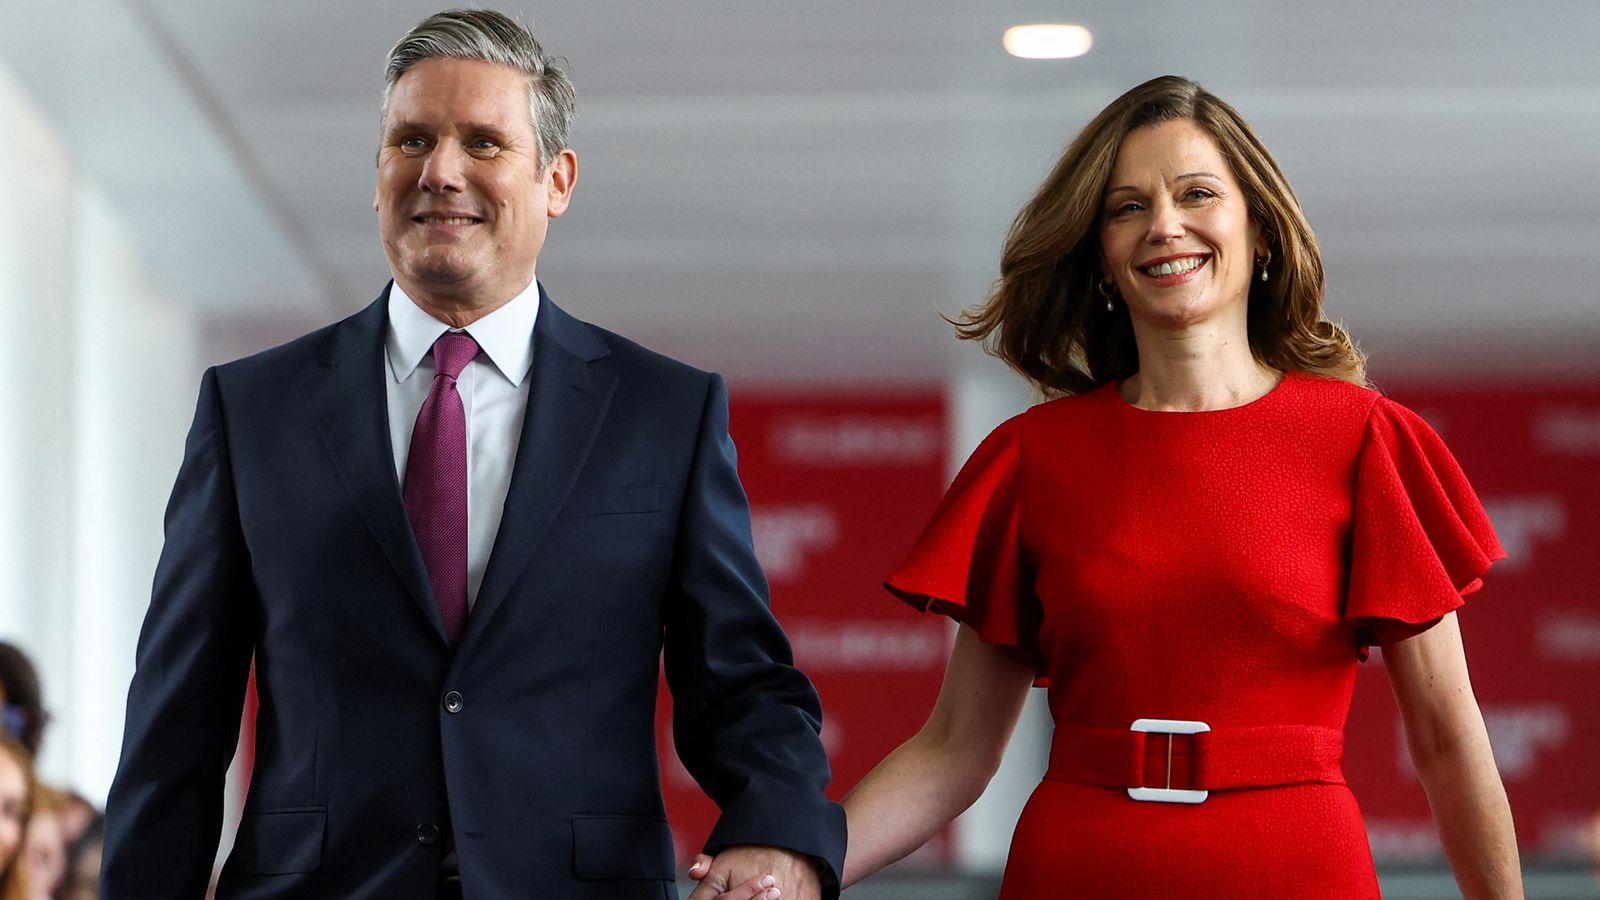 Who is Keir Starmer's wife, Lady Victoria Starmer?